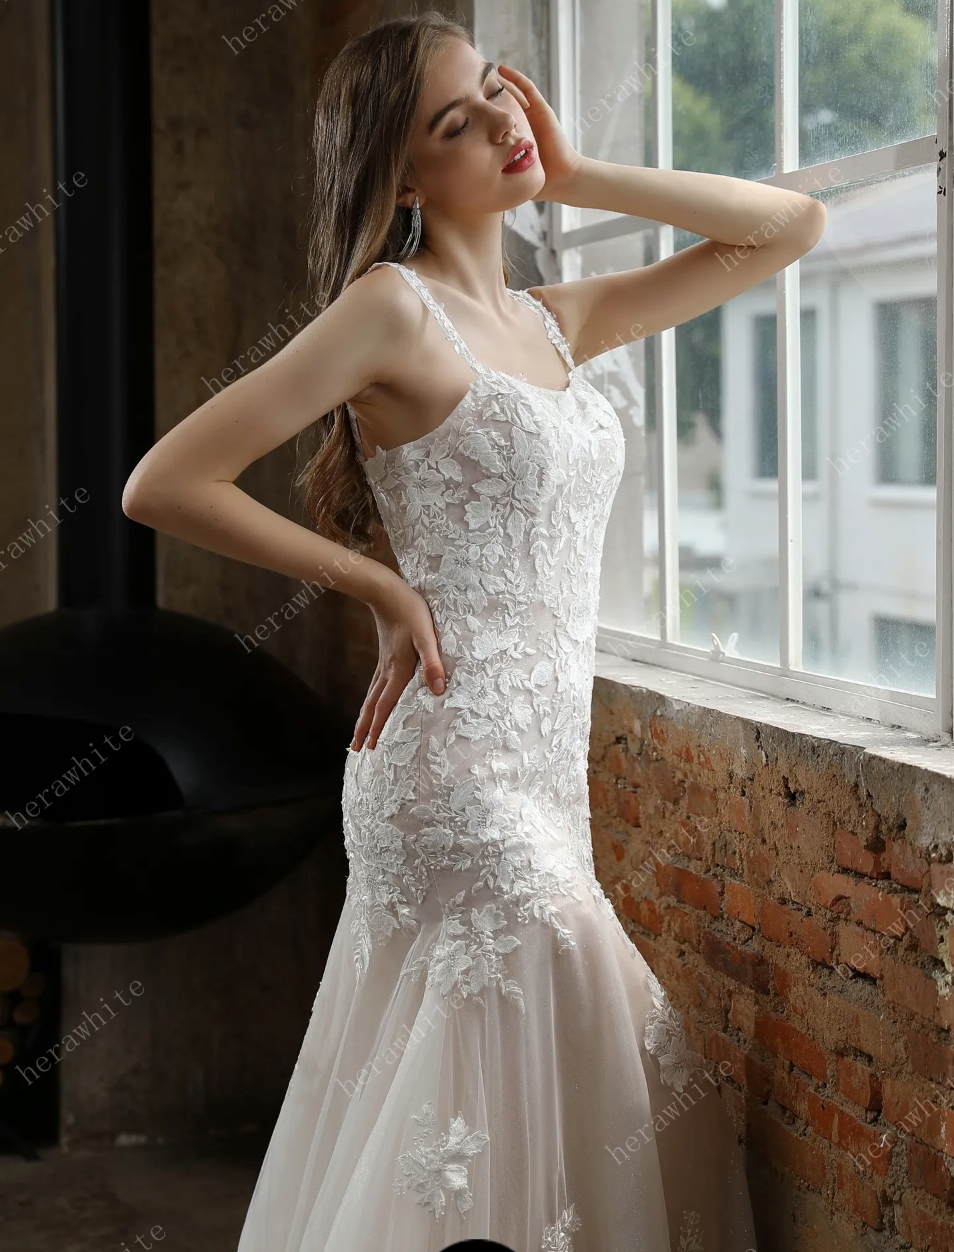 Square Neckline Wedding Dress with Delicate Leafy Lace – TulleLux